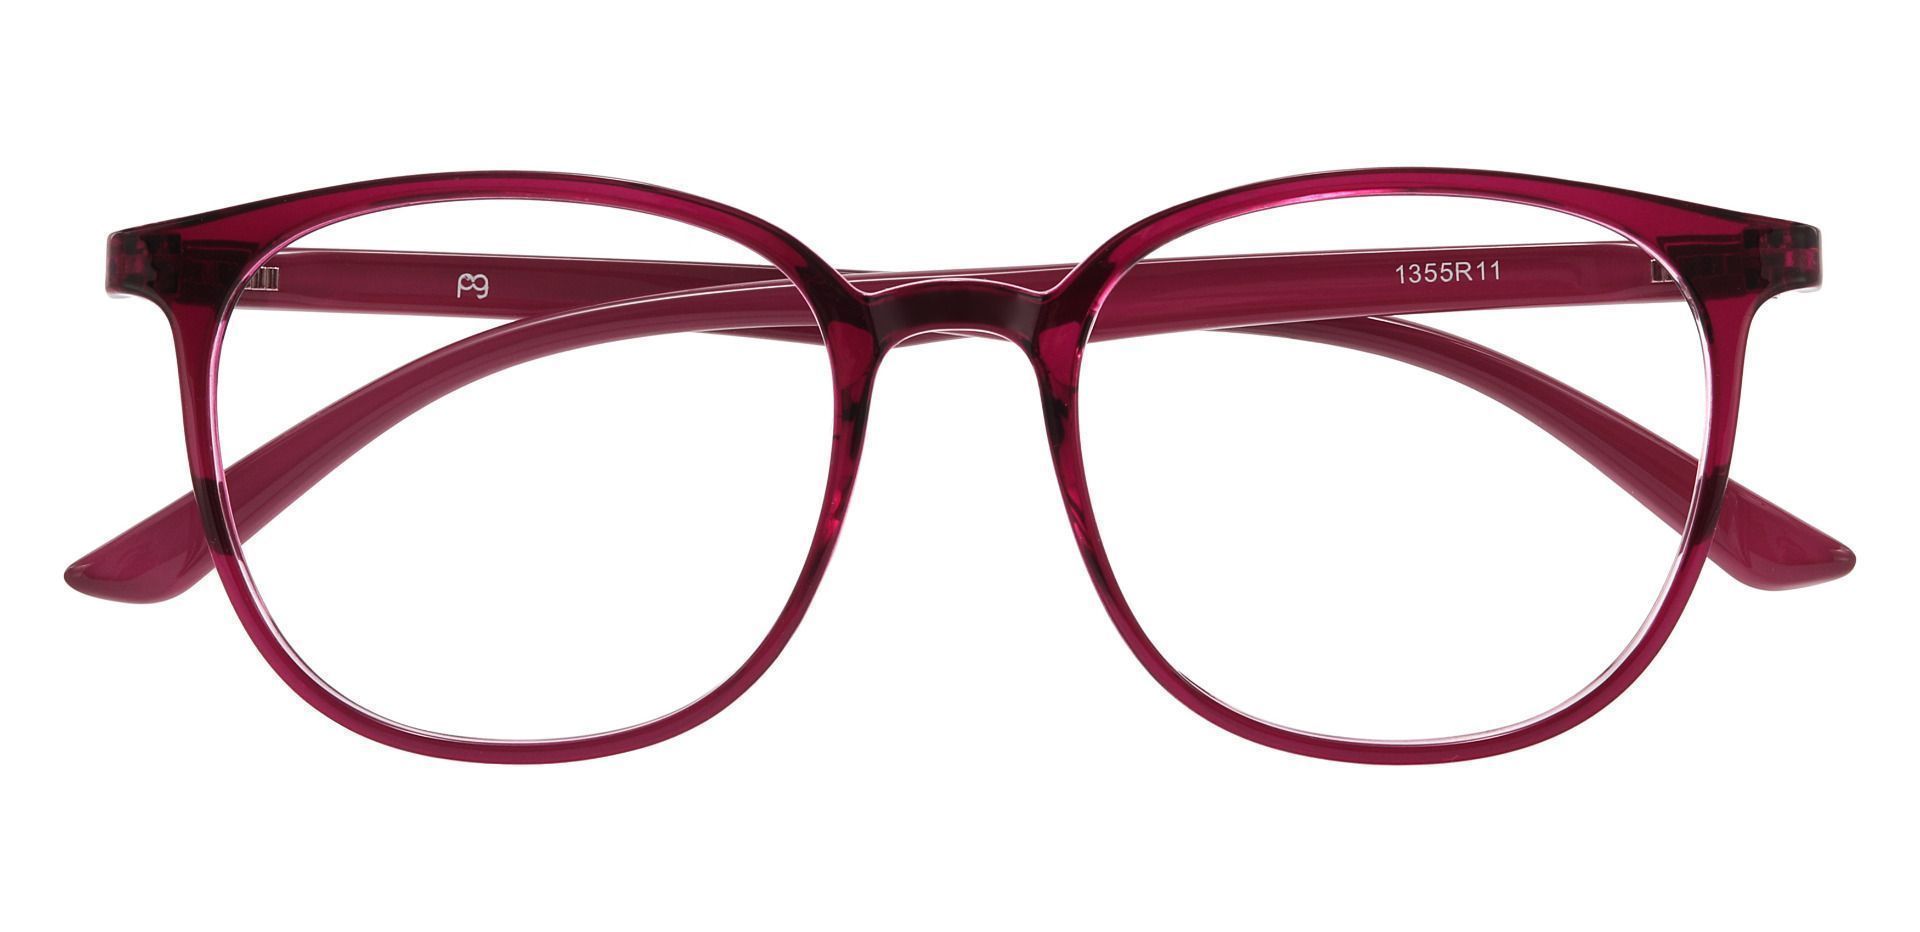 Kelso Square Reading Glasses - Red